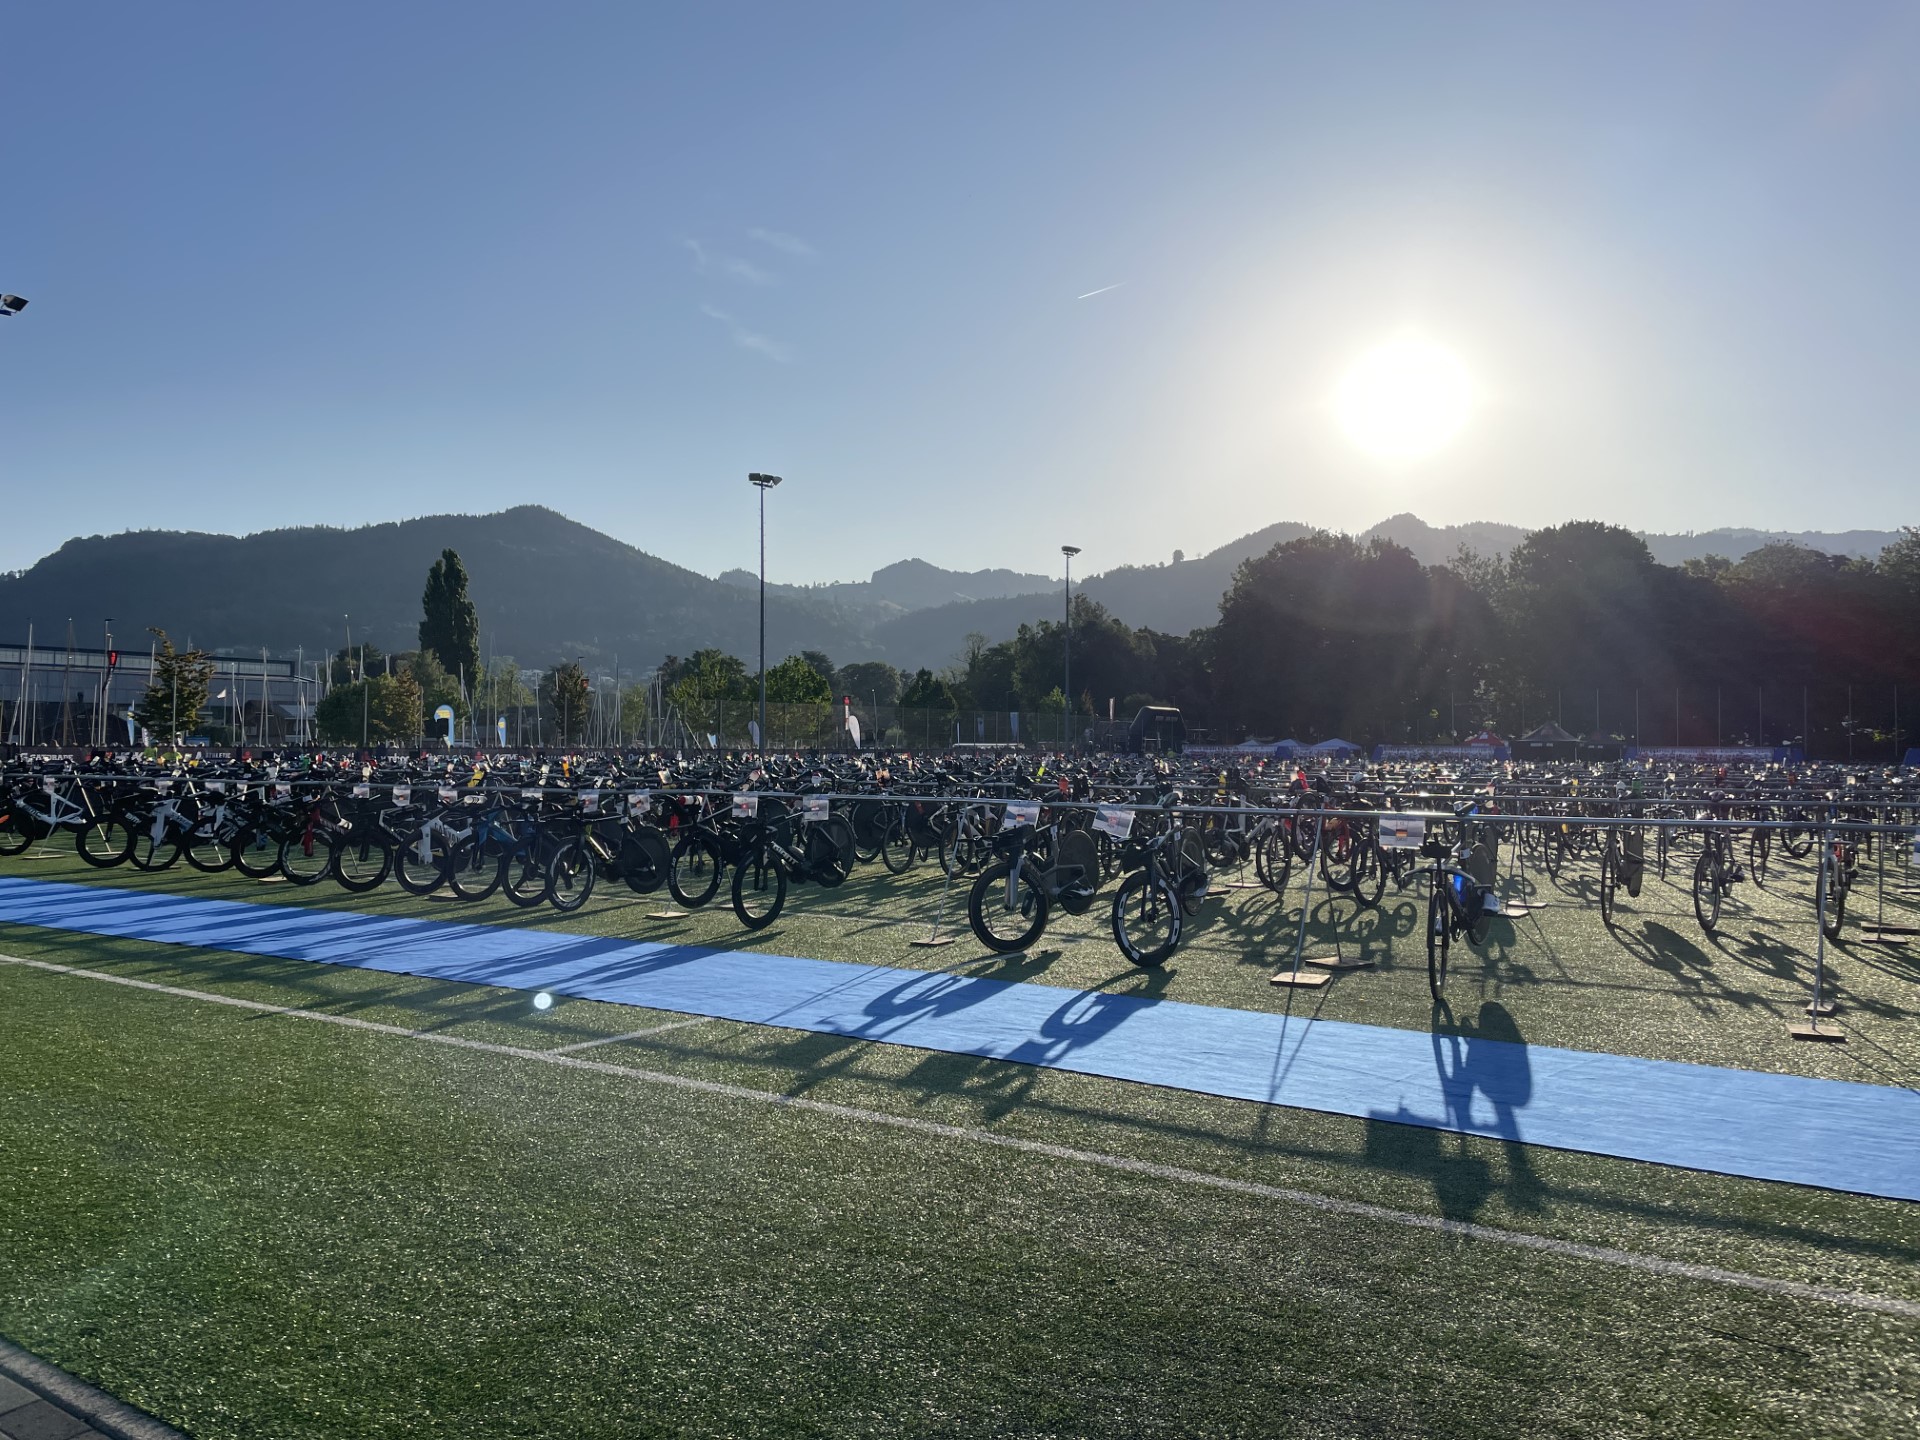 Ironman Switzerland showing bikes racked in transition with a hilly backdrop.